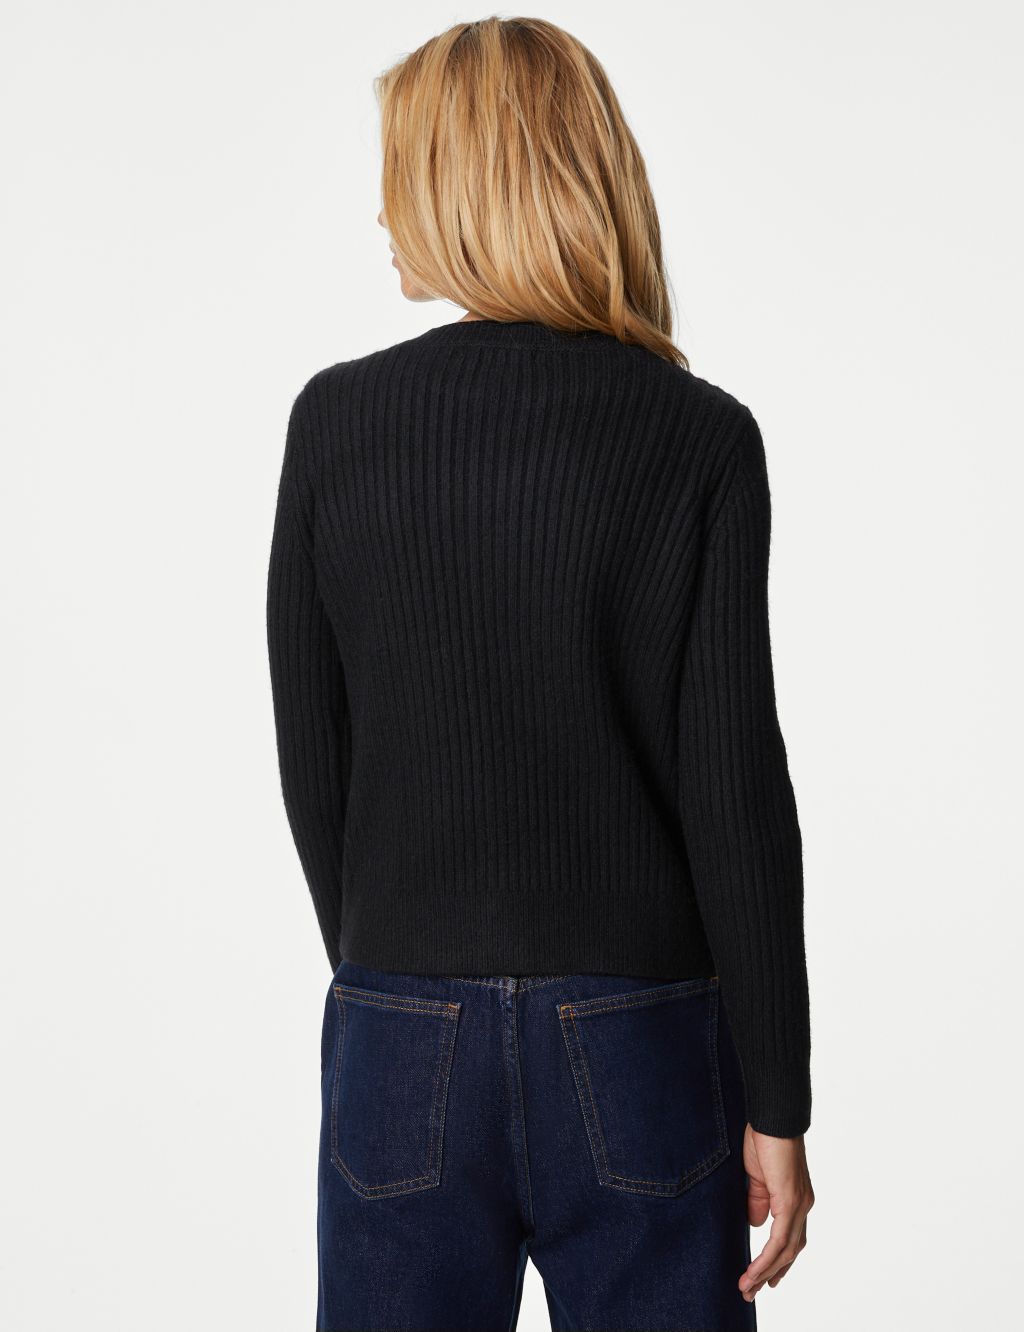 Knitted Ribbed Crew Neck Cardigan image 5